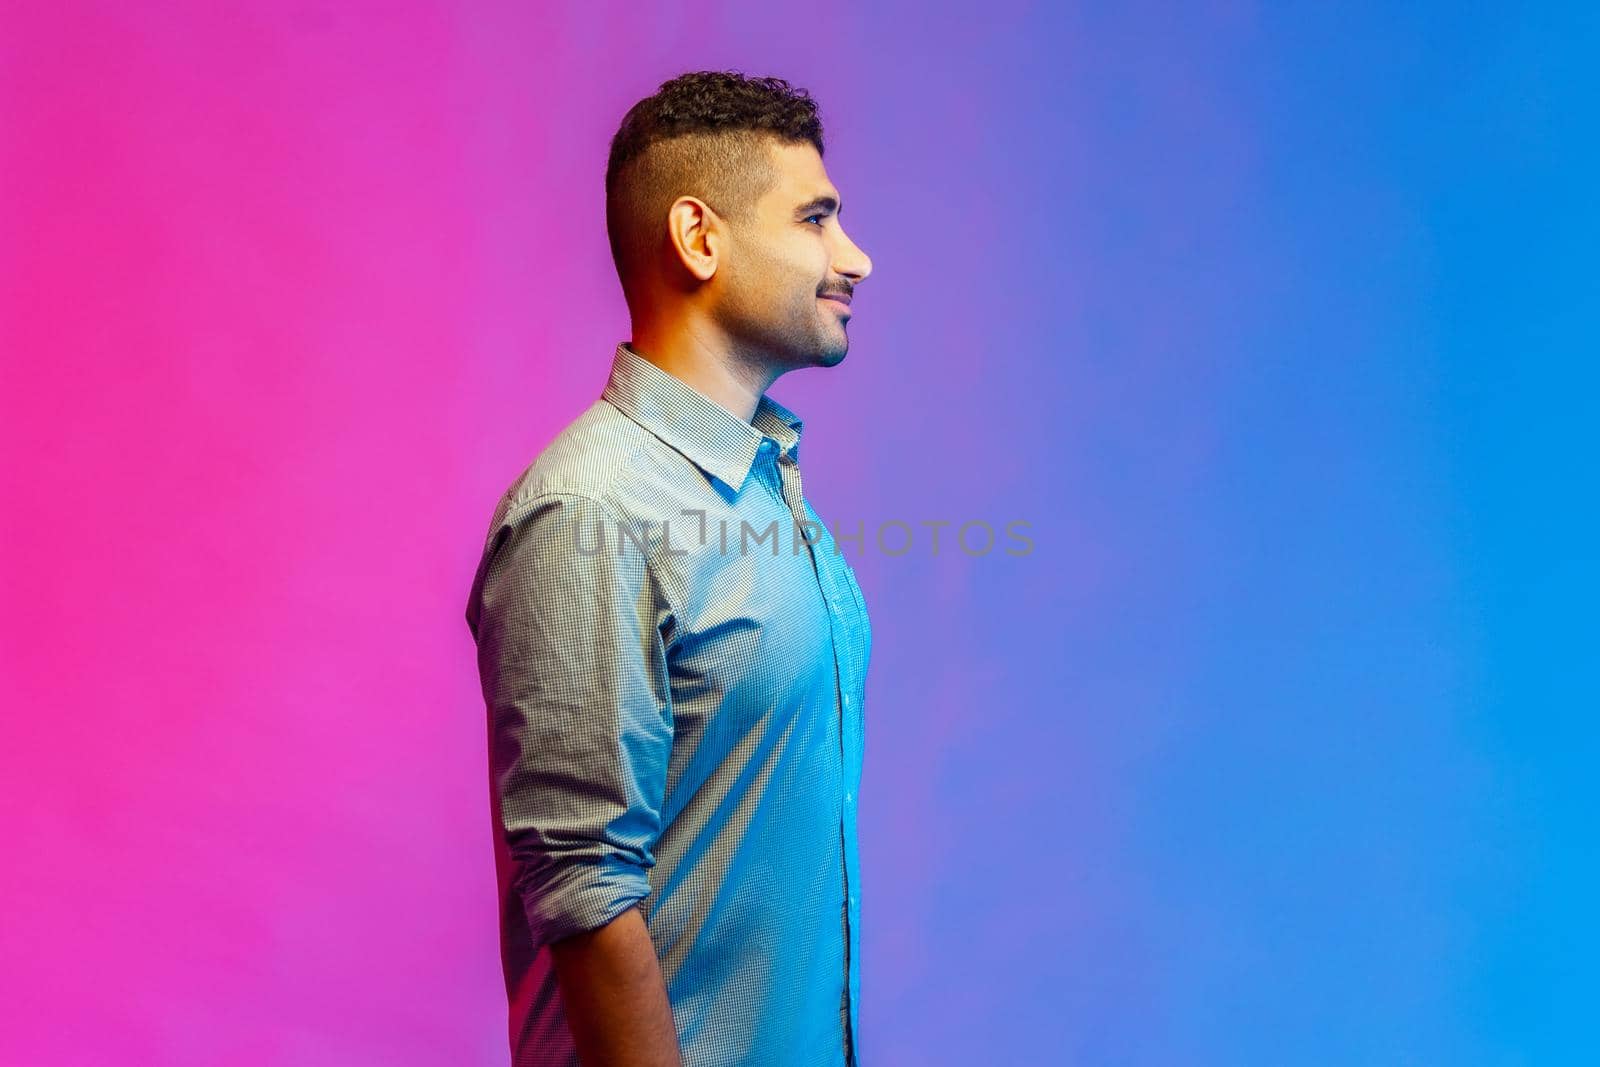 Side view portrait of young adult smiling handsome man in shirt standing looking ahead with happy positive facial expression. Indoor studio shot isolated on colorful neon light background.